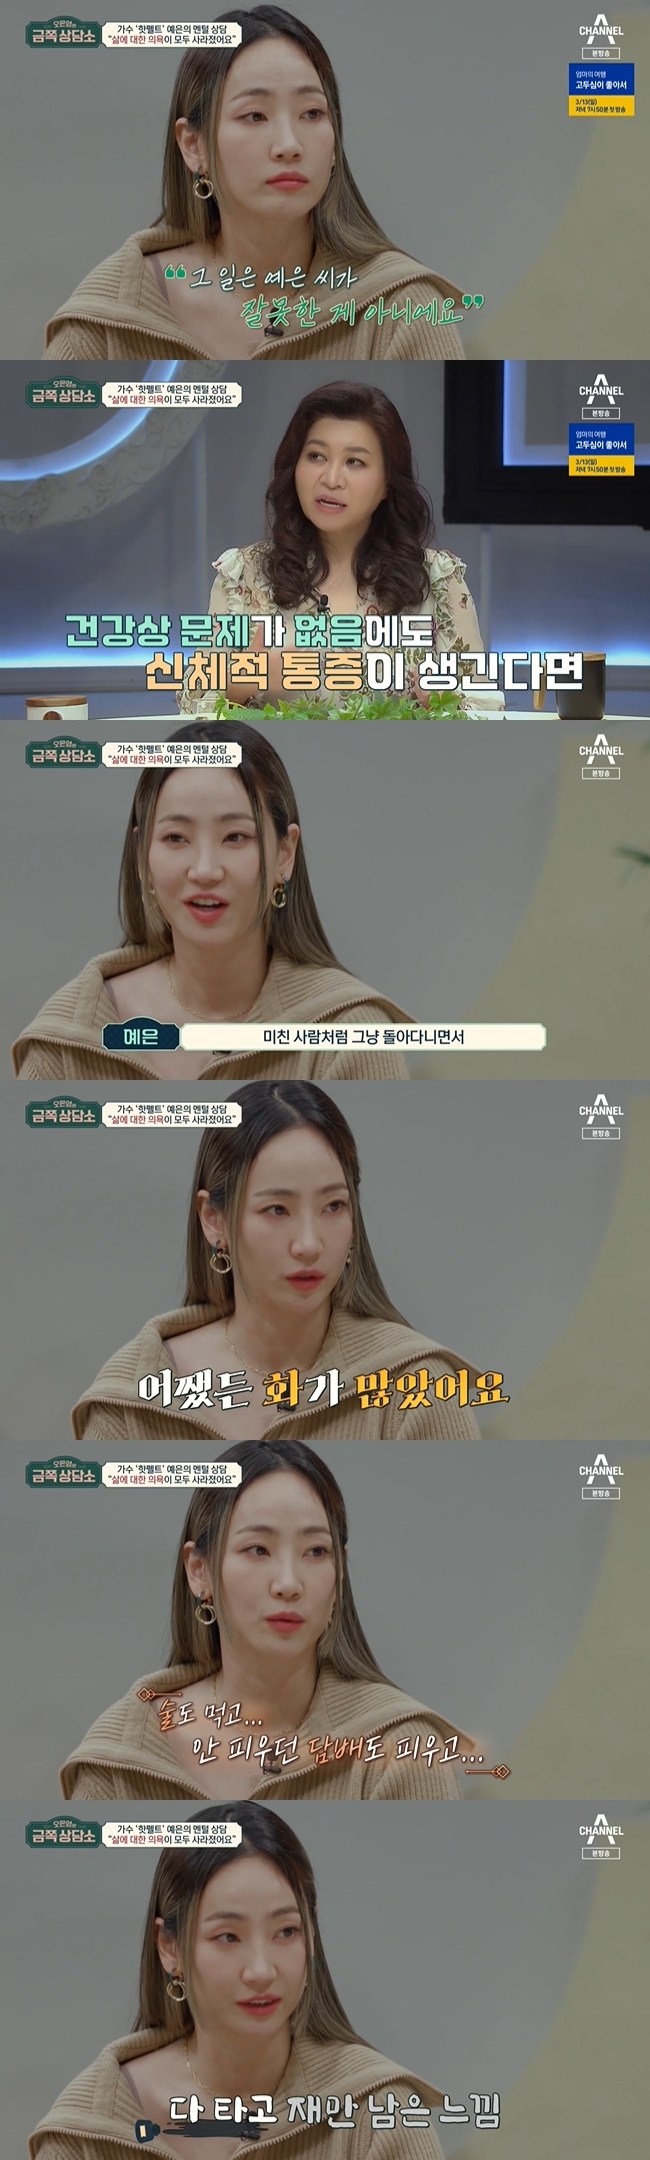 Singer Park Ye-eun confessed to living a life of desperation after being hurt by his fathers fraud.On March 11, Channel A Oh Eun-youngs Gold Counseling Center released a sad story about Hotfeld Park Ye-euns father.On the air, Park Ye-eun revealed the story of his father, who forgiven him after convincing Family, committed 20 billion One fraud cases.Park Ye-eun, who was accused with his father at the time, fortunately solved his injustice without charge, but the wound toward his father was left largely.Dr Oh Eun Young said: The fraud case is not to blame for Mr. Park Ye-eun. Its not your fault, its not your responsibility.You must understand and know that injustice, or you hurt yourself because of that injustice. The feelings that have not been handled in me are expressed as physical symptoms.I have to think about my emotional problems. I asked Park Ye-eun if there was any sick or uncomfortable place.Park Ye-eun said, I think it hurt a lot in the beginning. I just walked around like a crazy person pretending to be okay.I was desperate because I thought, Why should I be hard if this is not my fault? He said, It may be abuse against myself, but I smoked a cigarette that I did not drink and I was not motivated by my life.It felt like ashes were left on board.